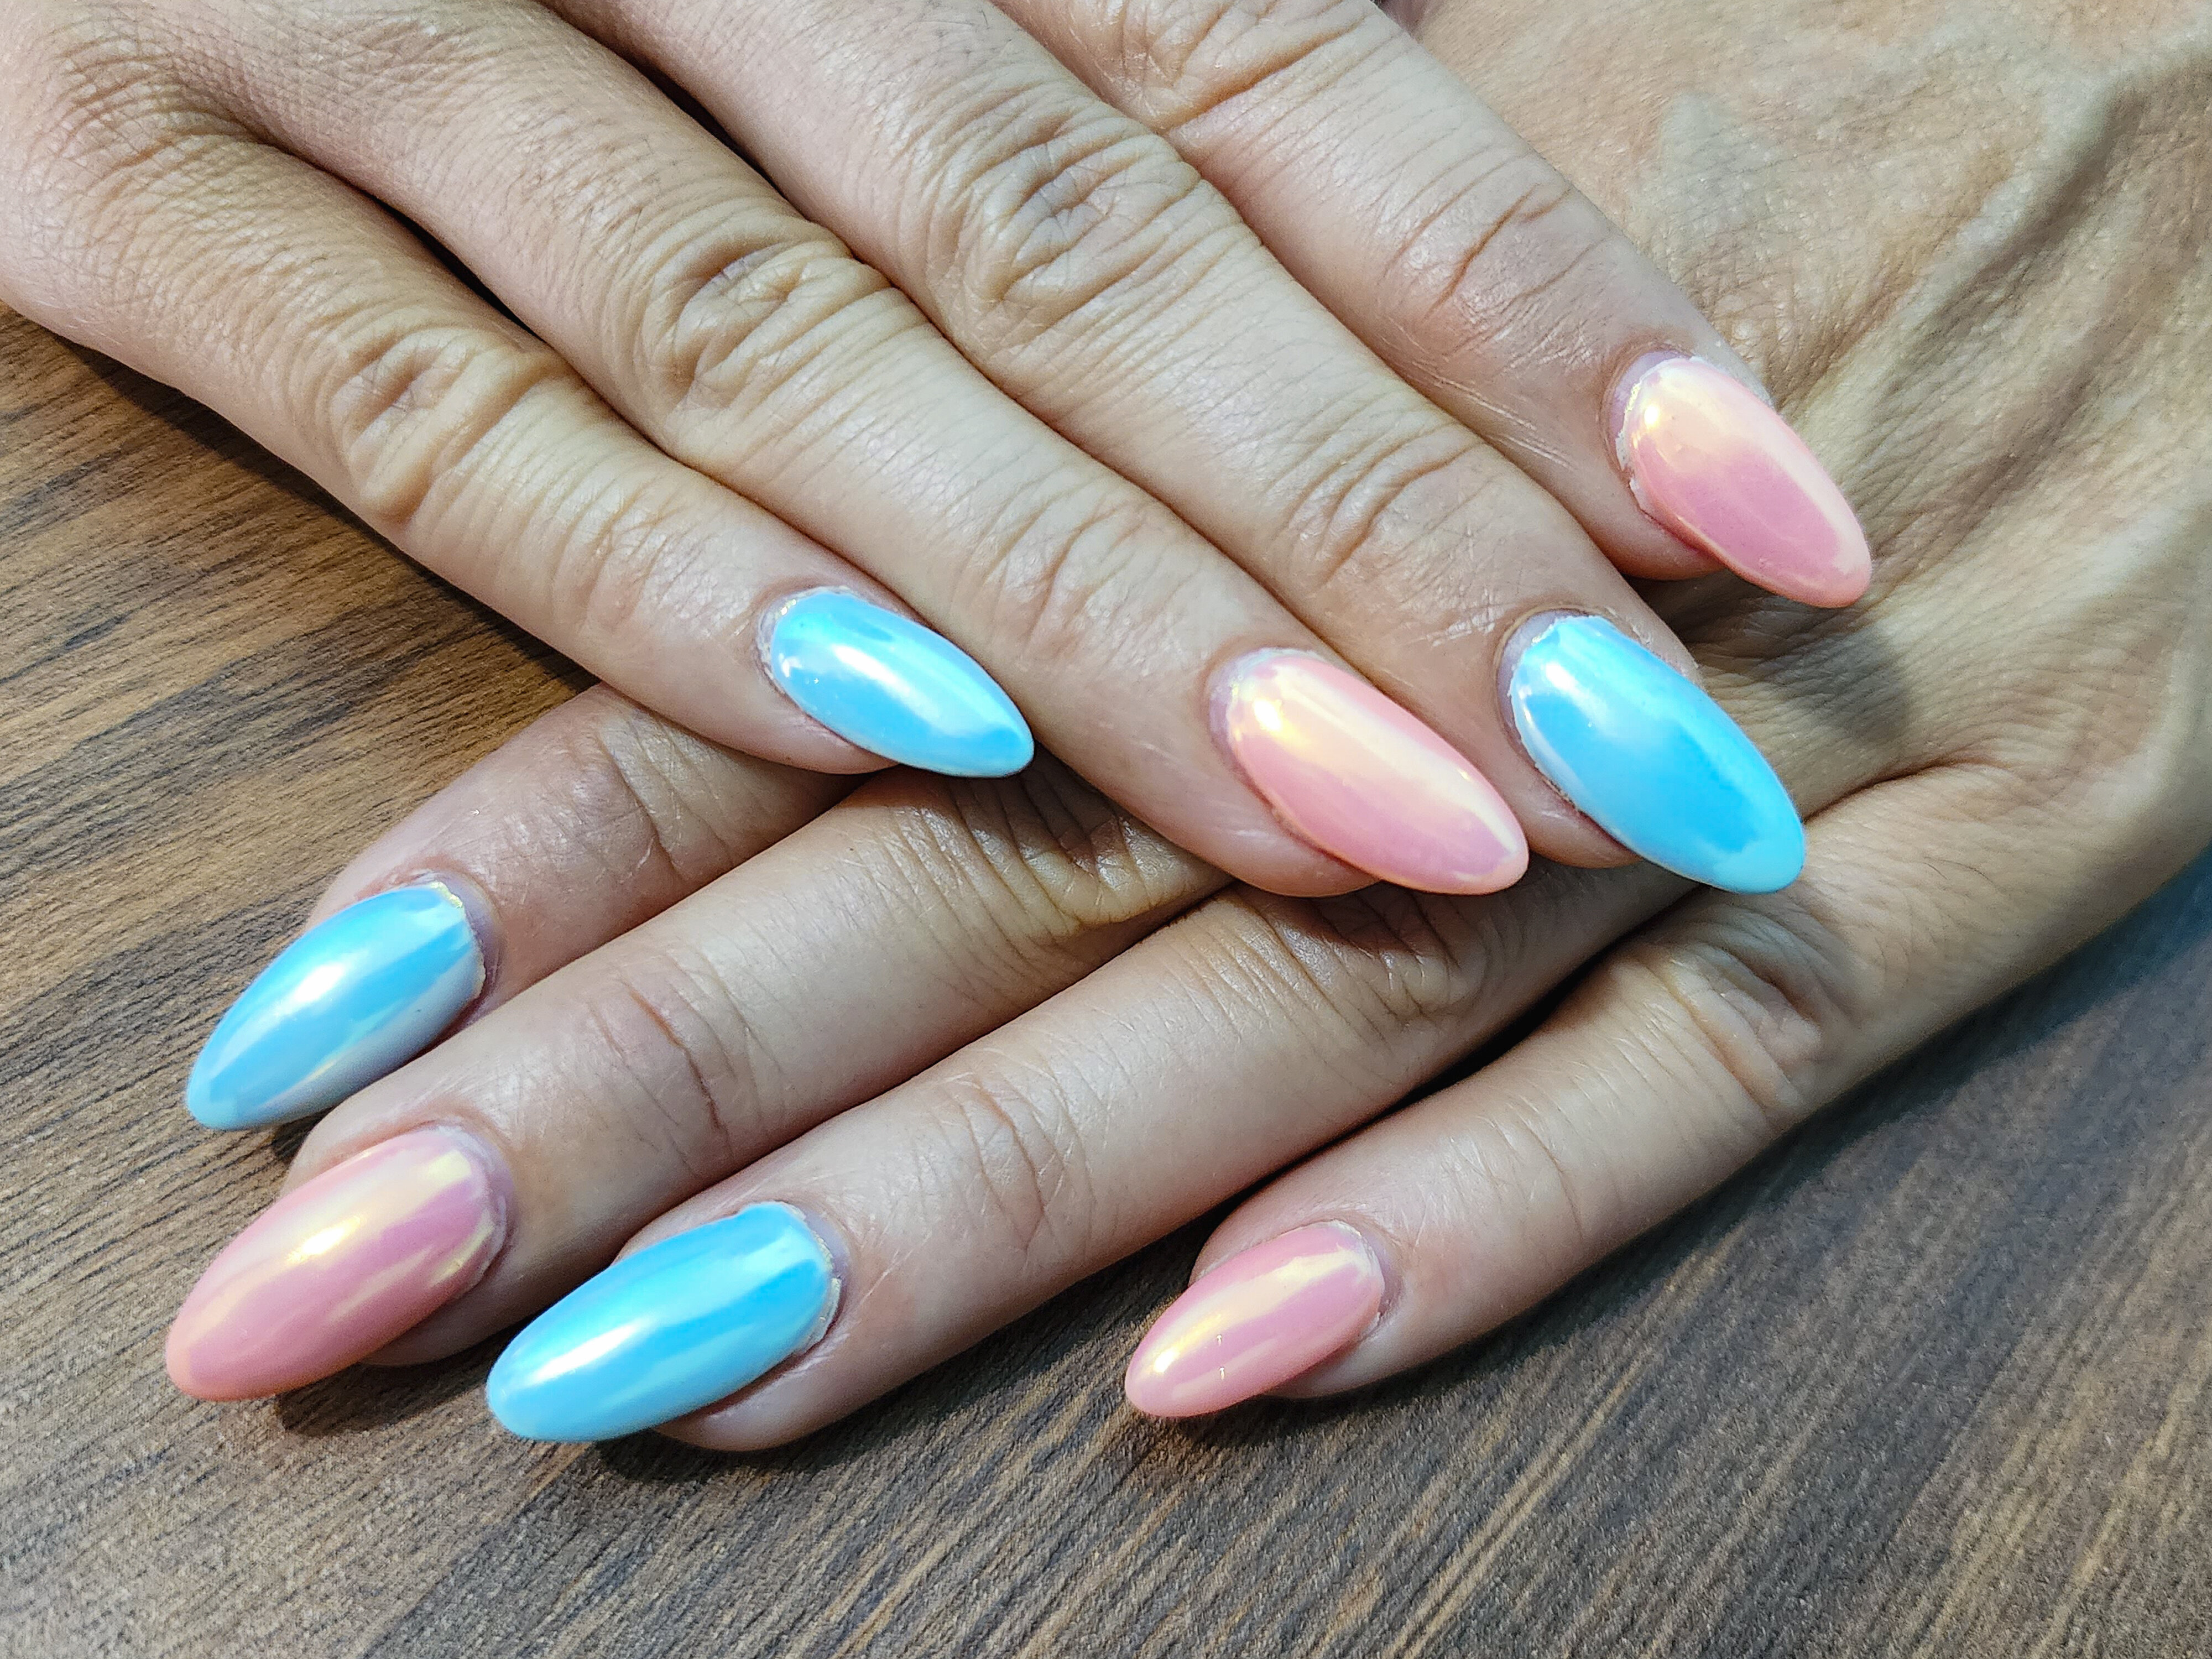 Gel Manicure UV Lights Can Damage Skin Cells, Here Is What We Know.